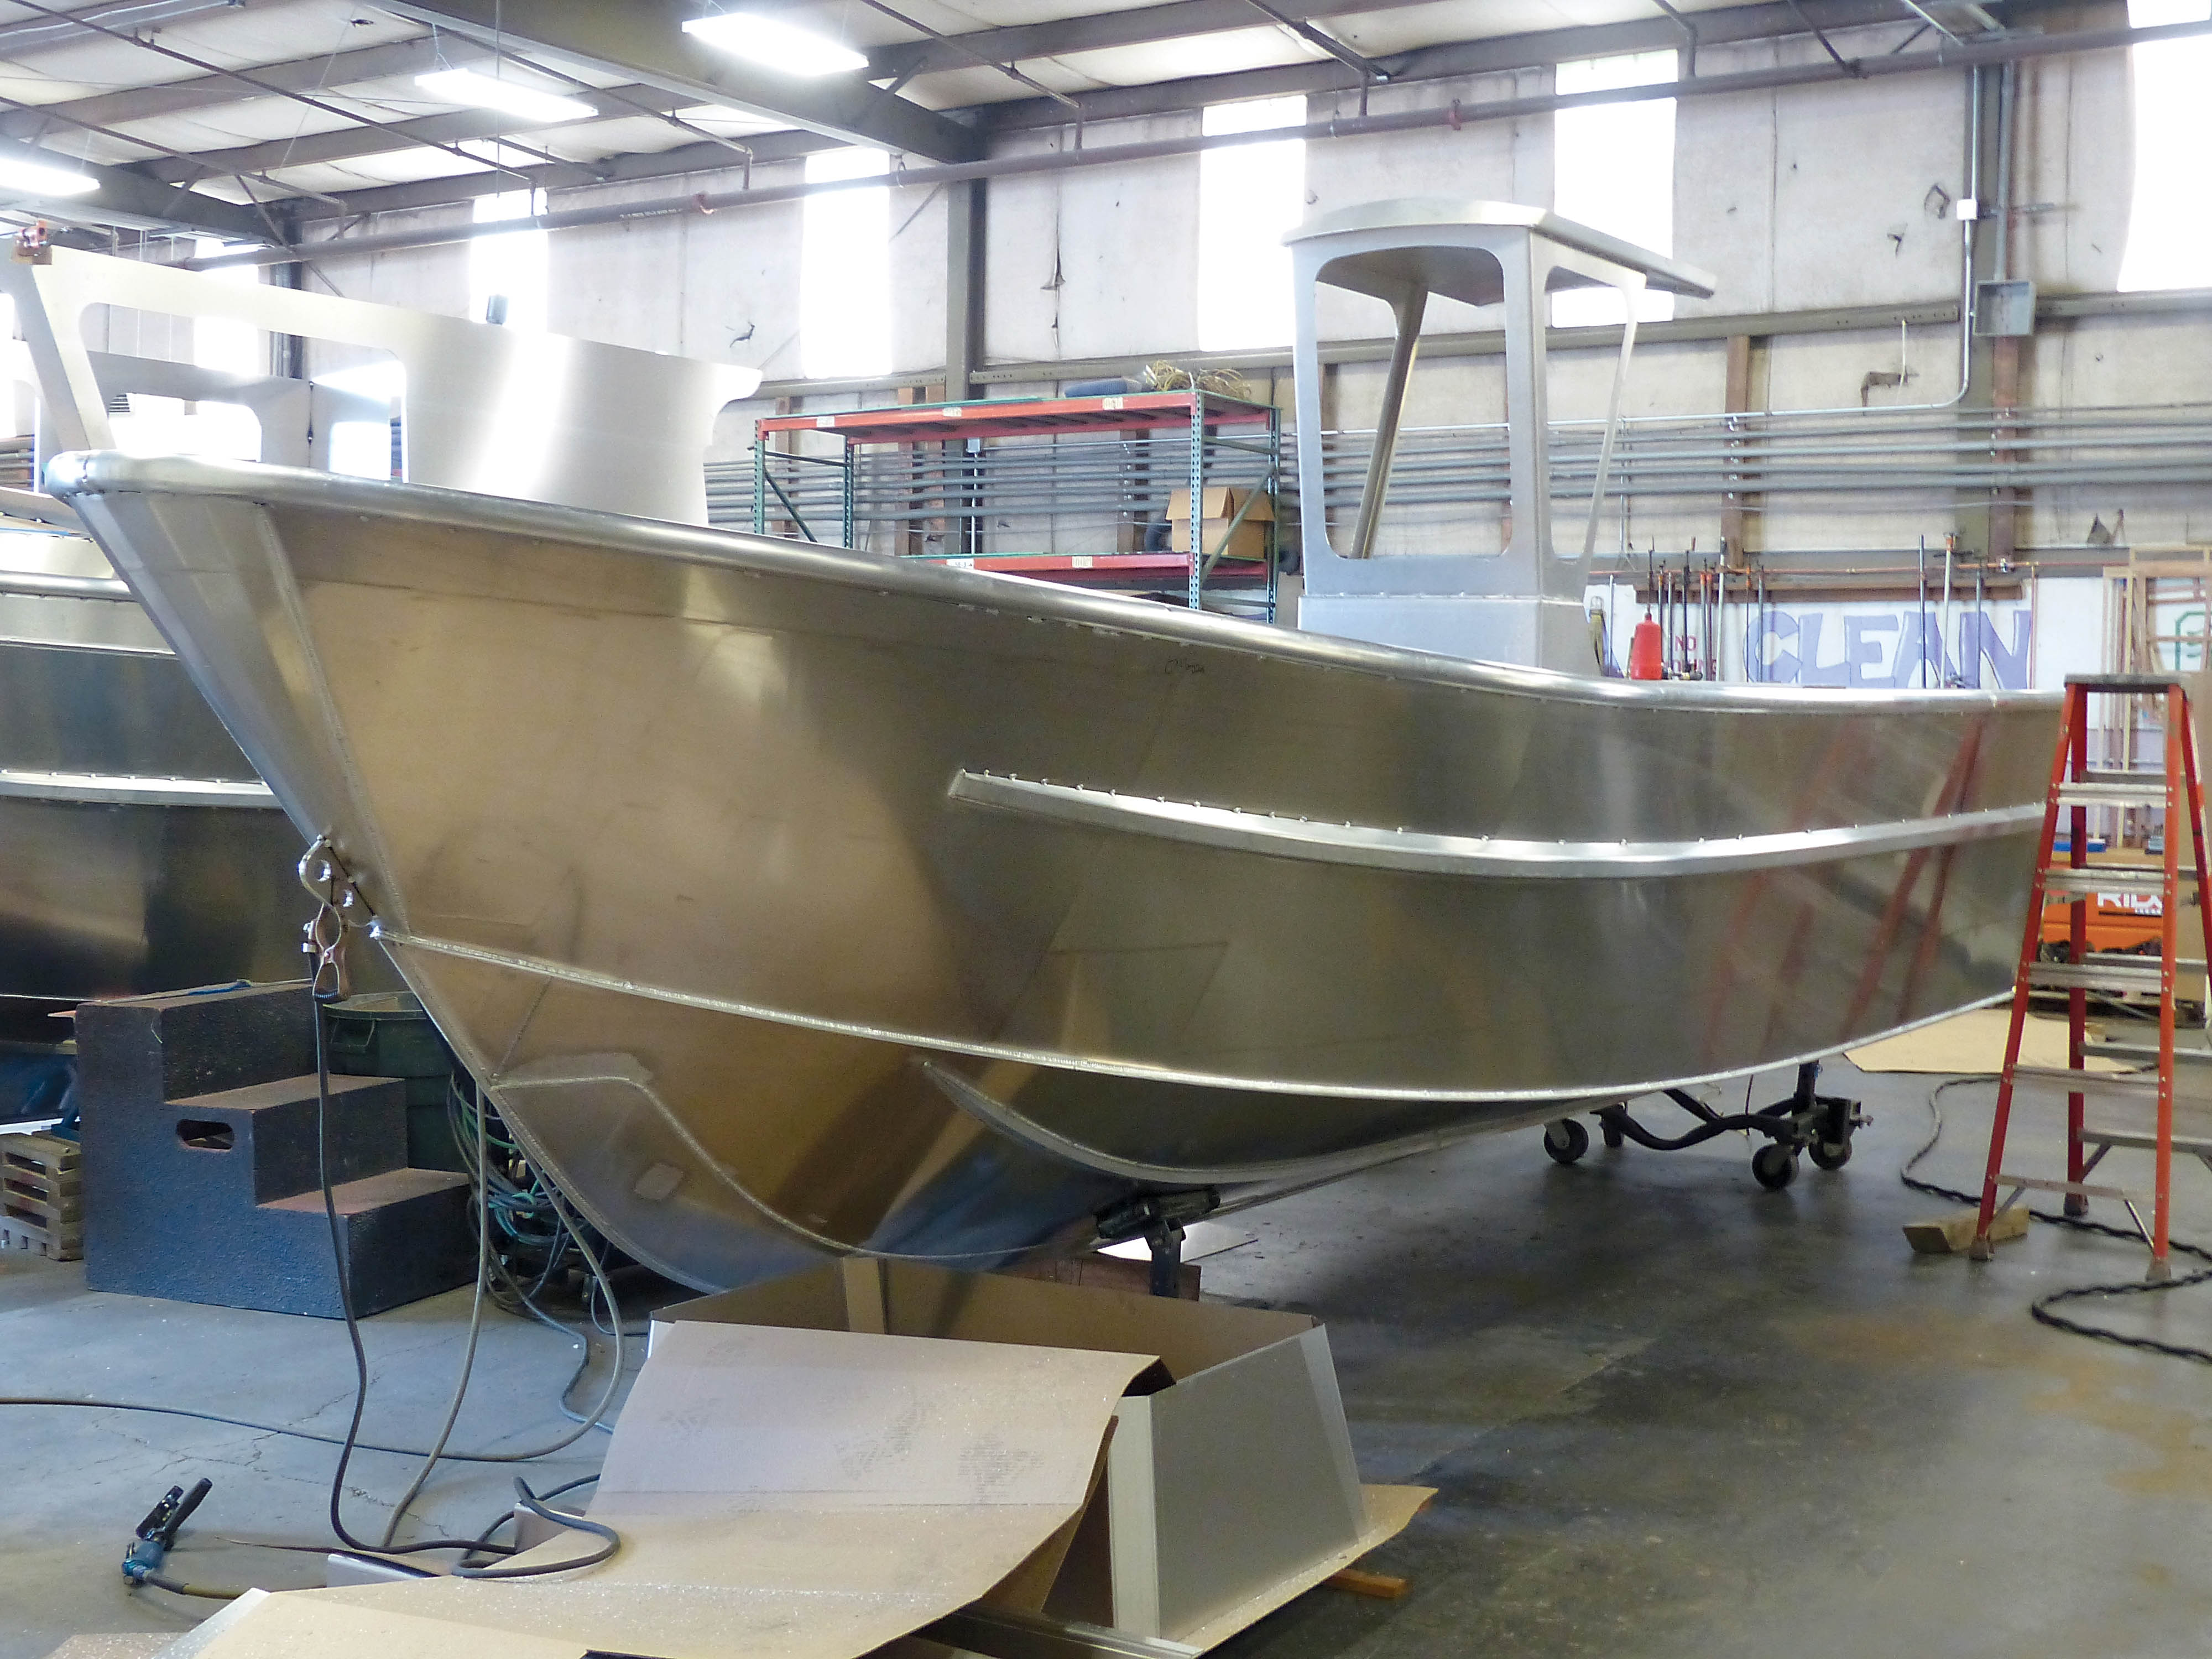 A 23-foot mono-hull boom boat built by Lee Shore Boats soon will be shipped to United Arab Emirates. —Photo by David G. Sellars/for Peninsula Daily News